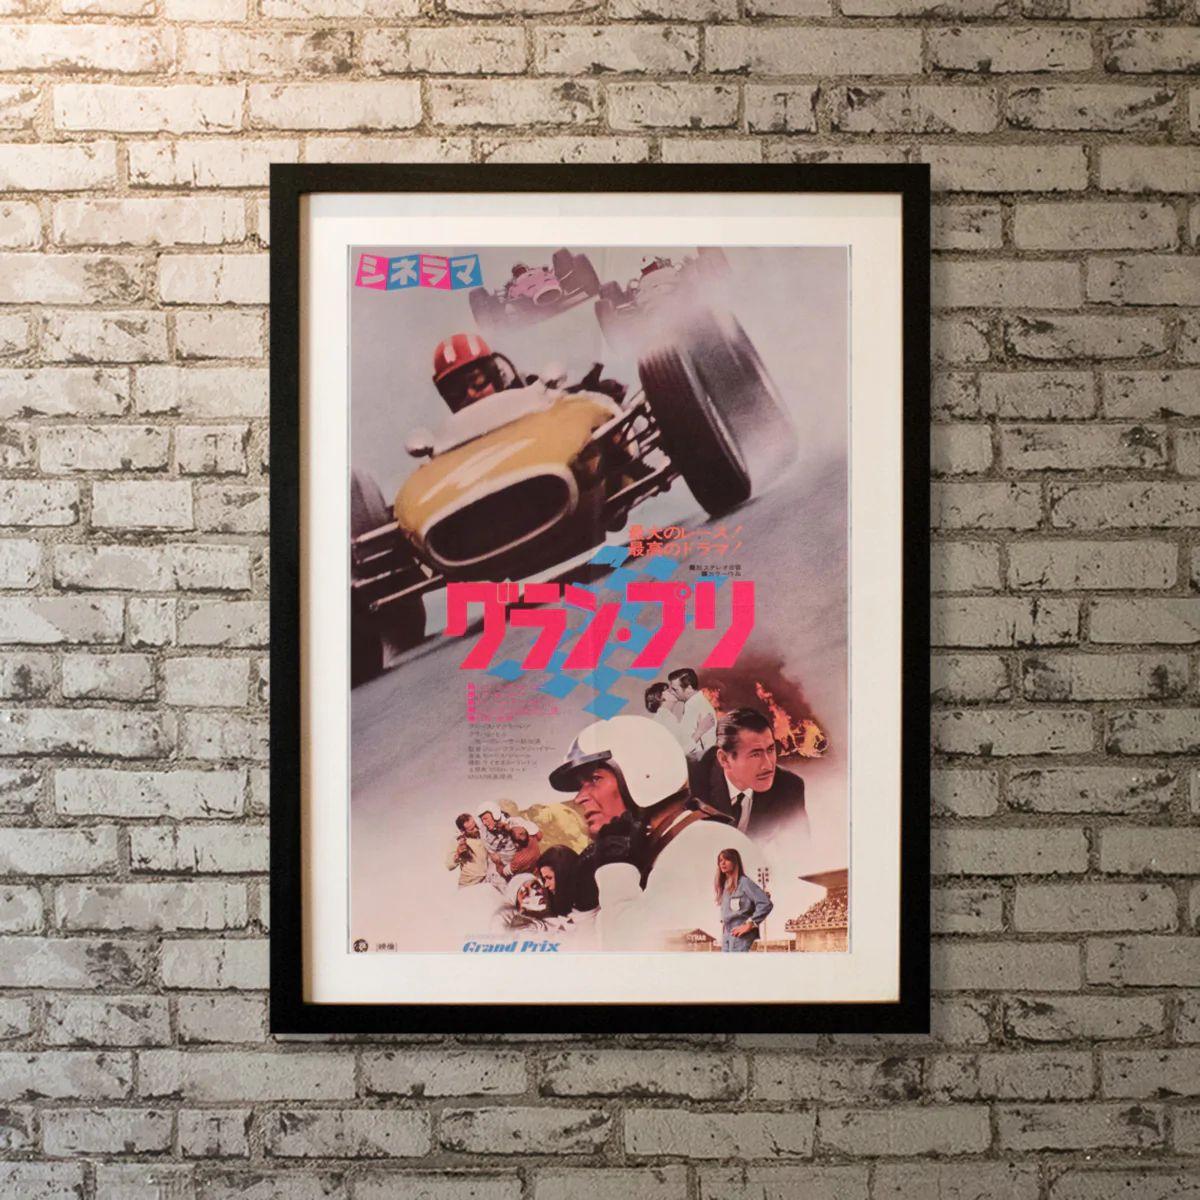 Grand Prix, Unframed Poster, 1966

Japanese B2 (20 X 29 Inches). American Grand Prix driver Pete Aron is fired by his Jordan-BRM racing team after a crash at Monaco that injures his British teammate, Scott Stoddard.

Year: 1966
Nationality: